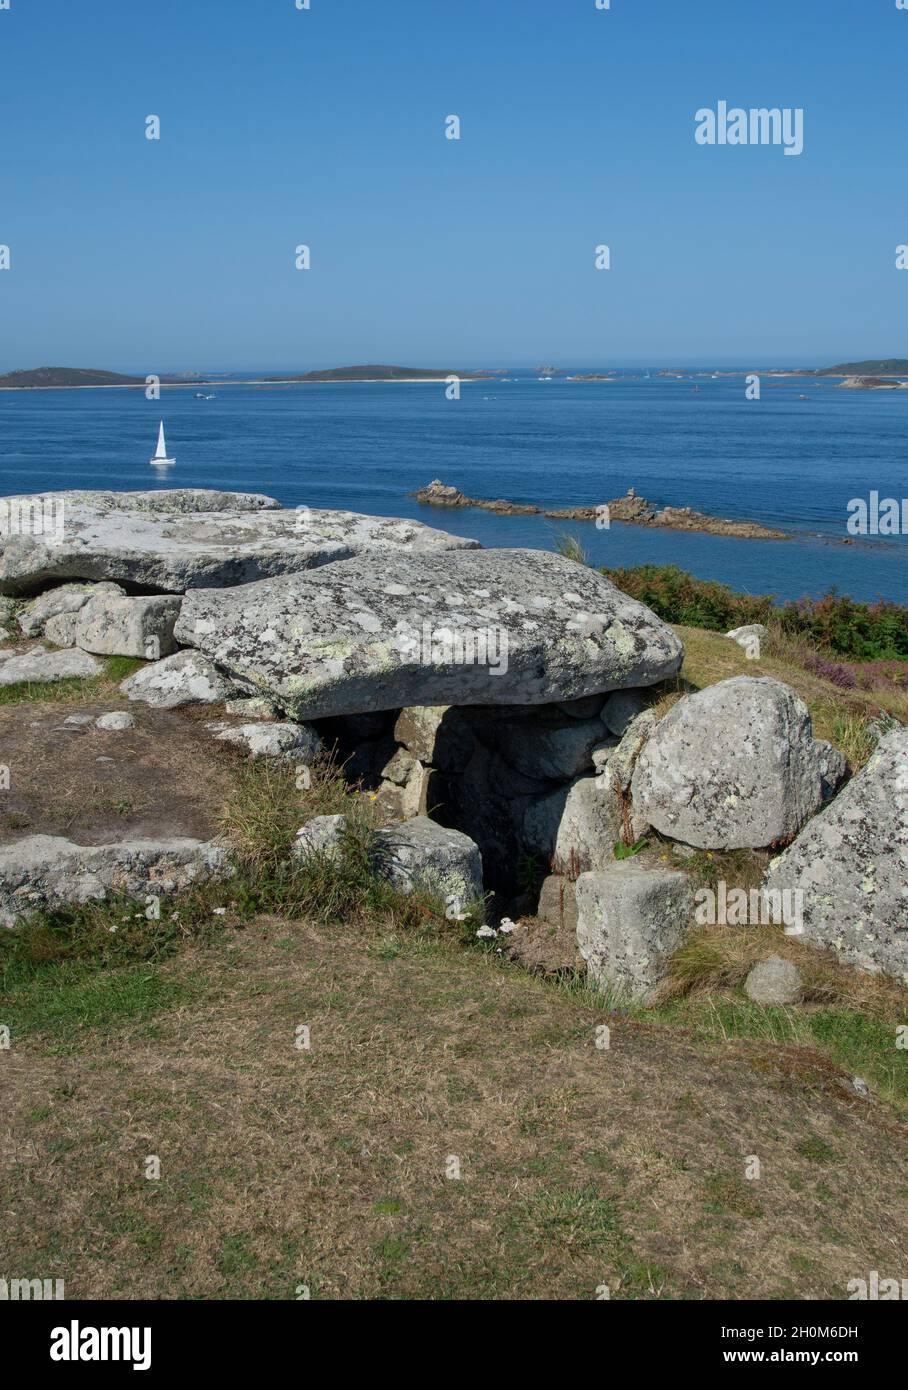 Bant's Carn Burial Chamber, St Mary's, Îles de Scilly, Cornwall, Royaume-Uni Banque D'Images